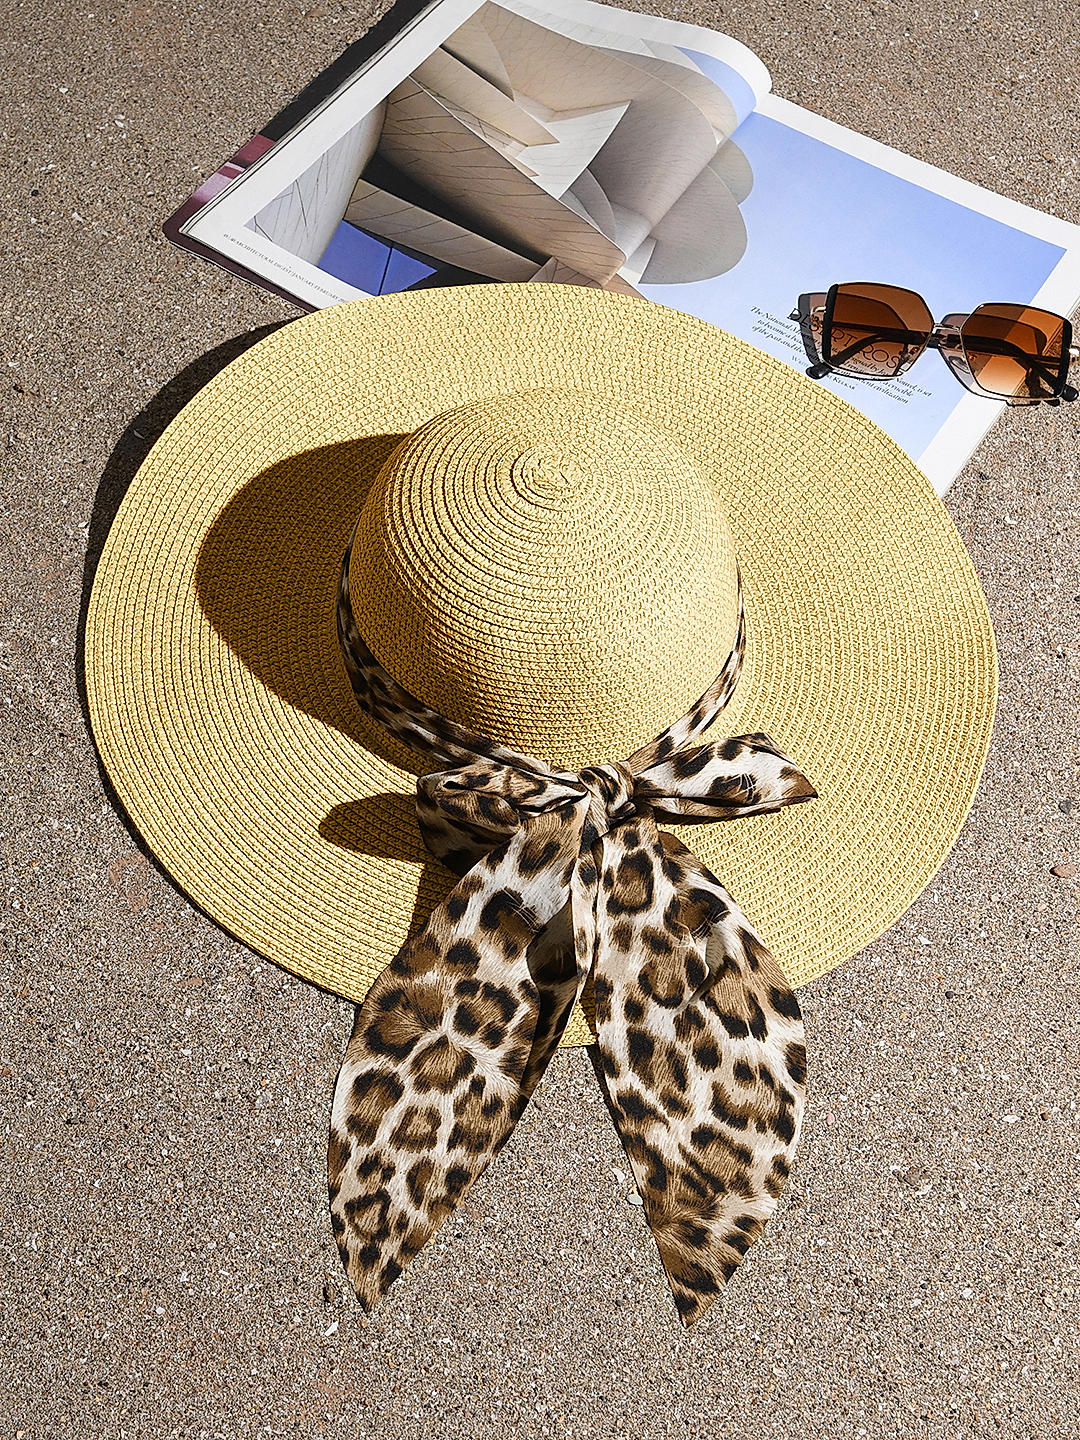 Buy Fashionable Summer Special Beach Hat at best Price